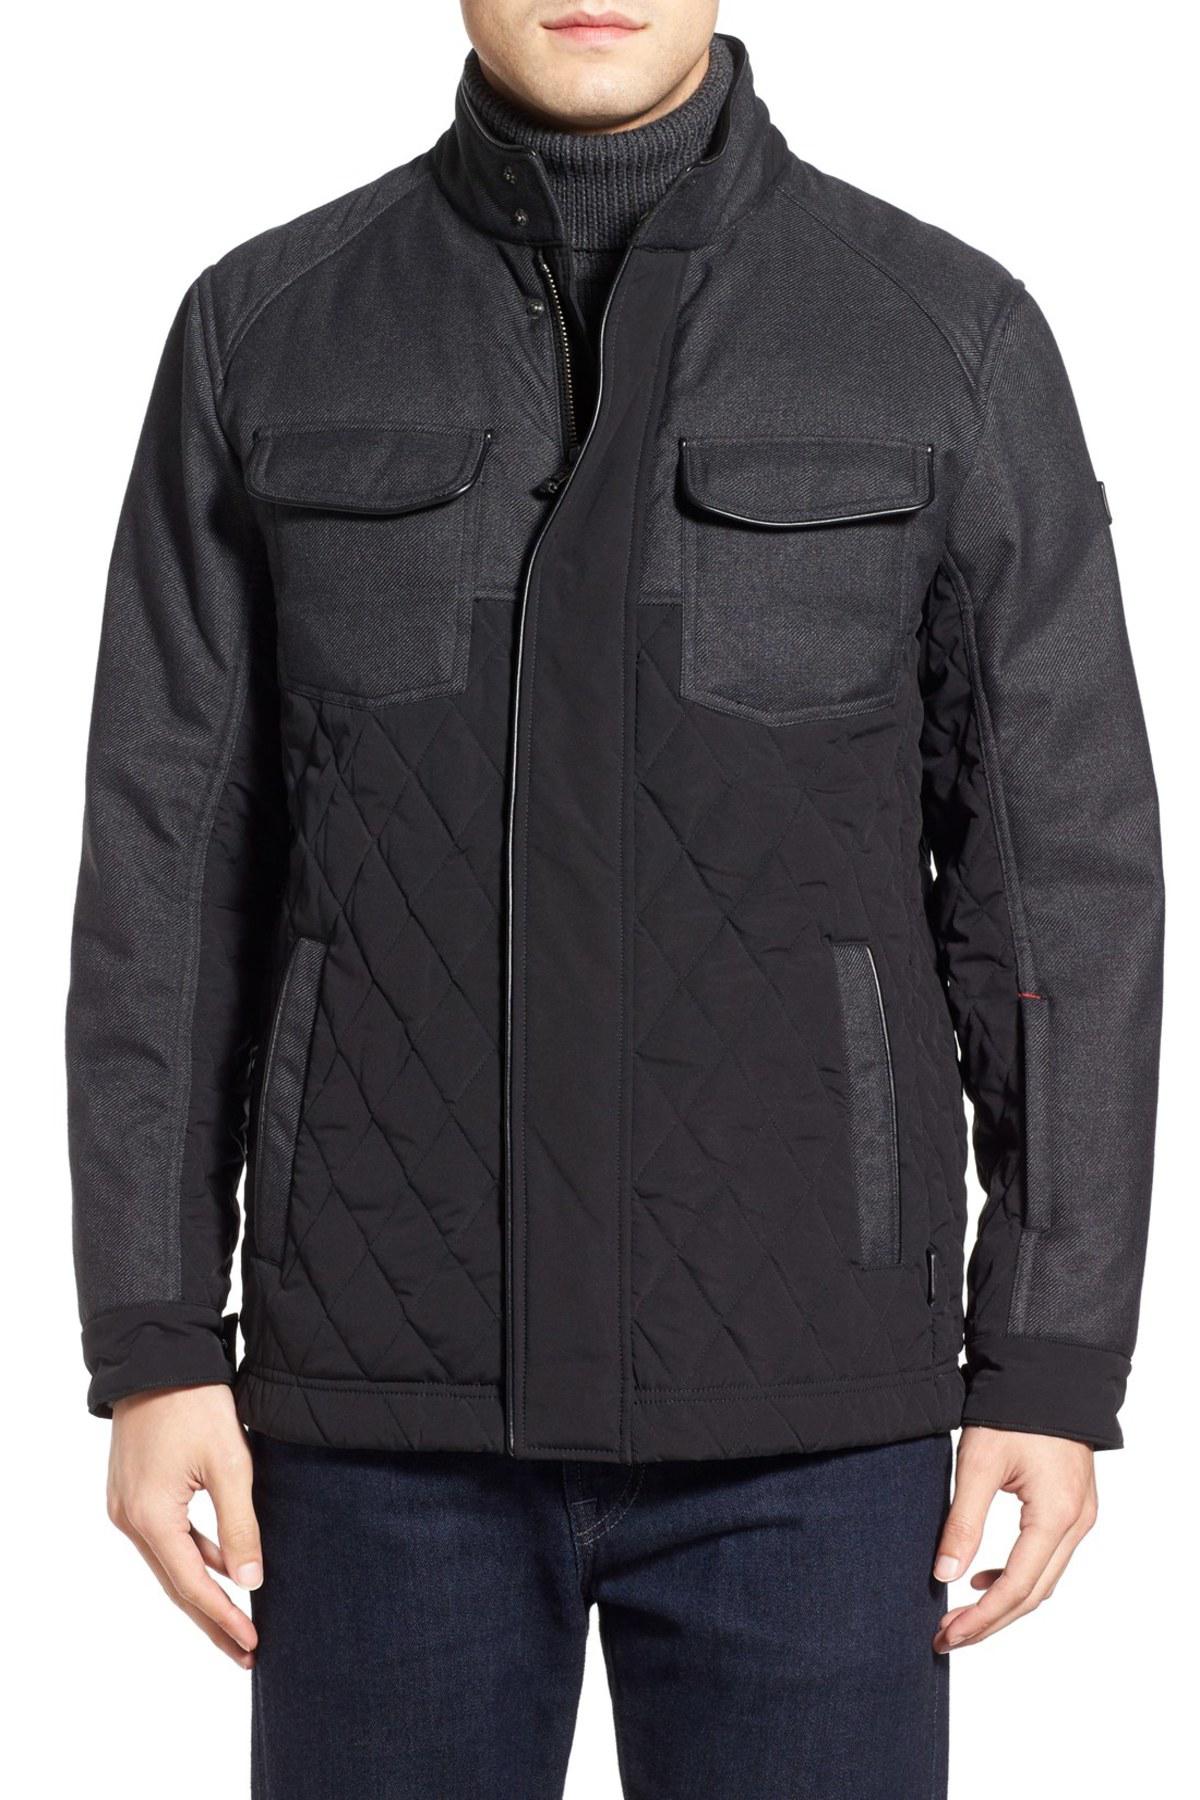 tumi heritage quilted jacket